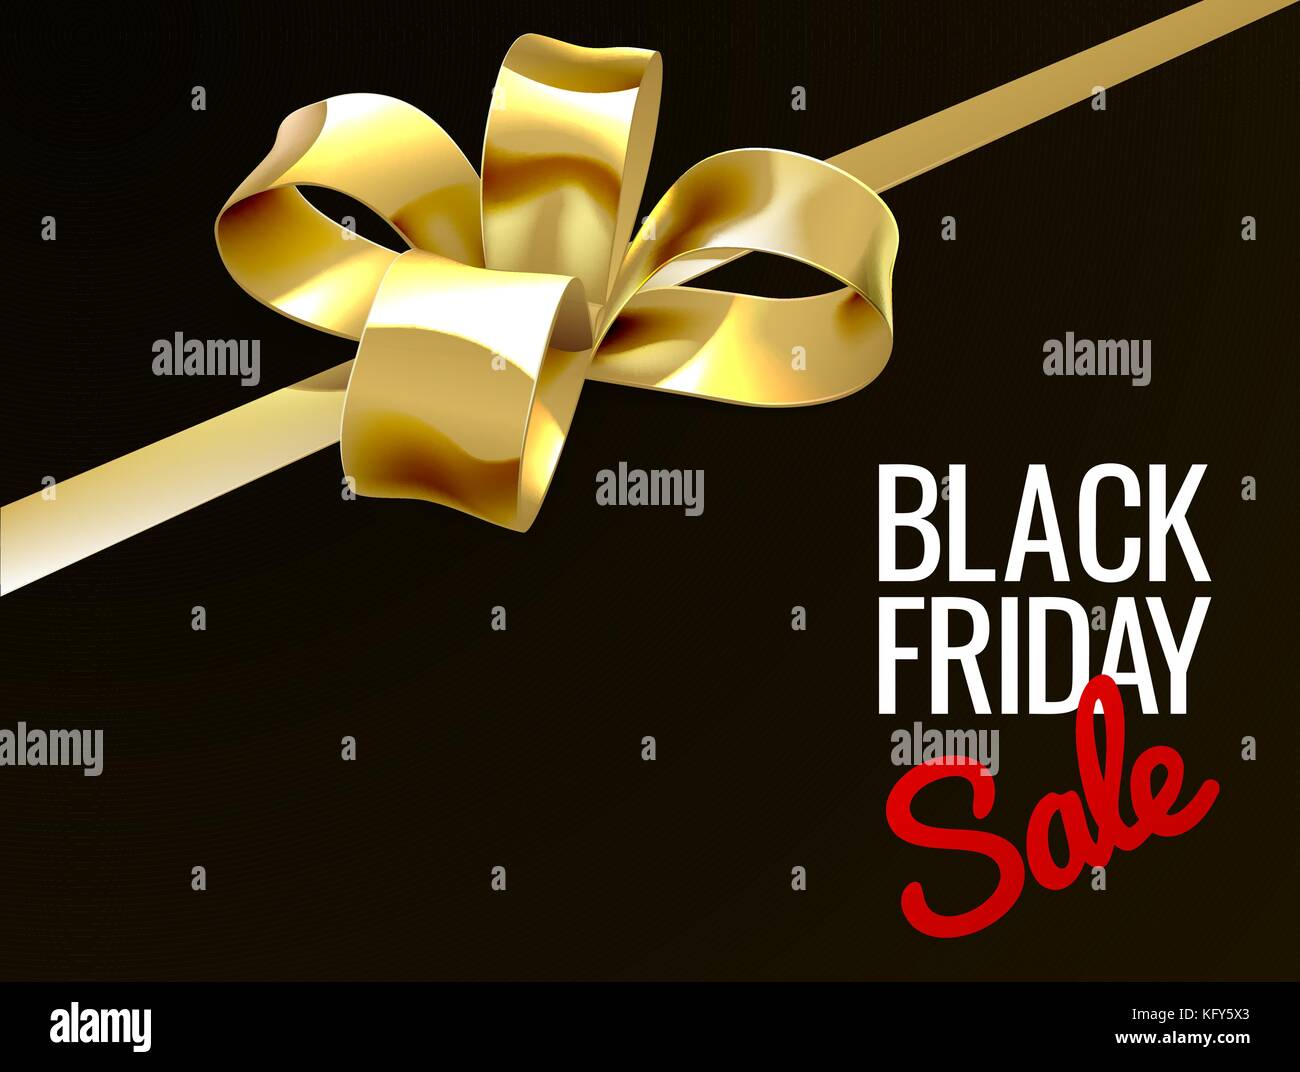 Black Friday Sale Gold Gift Bow Sign Stock Vector